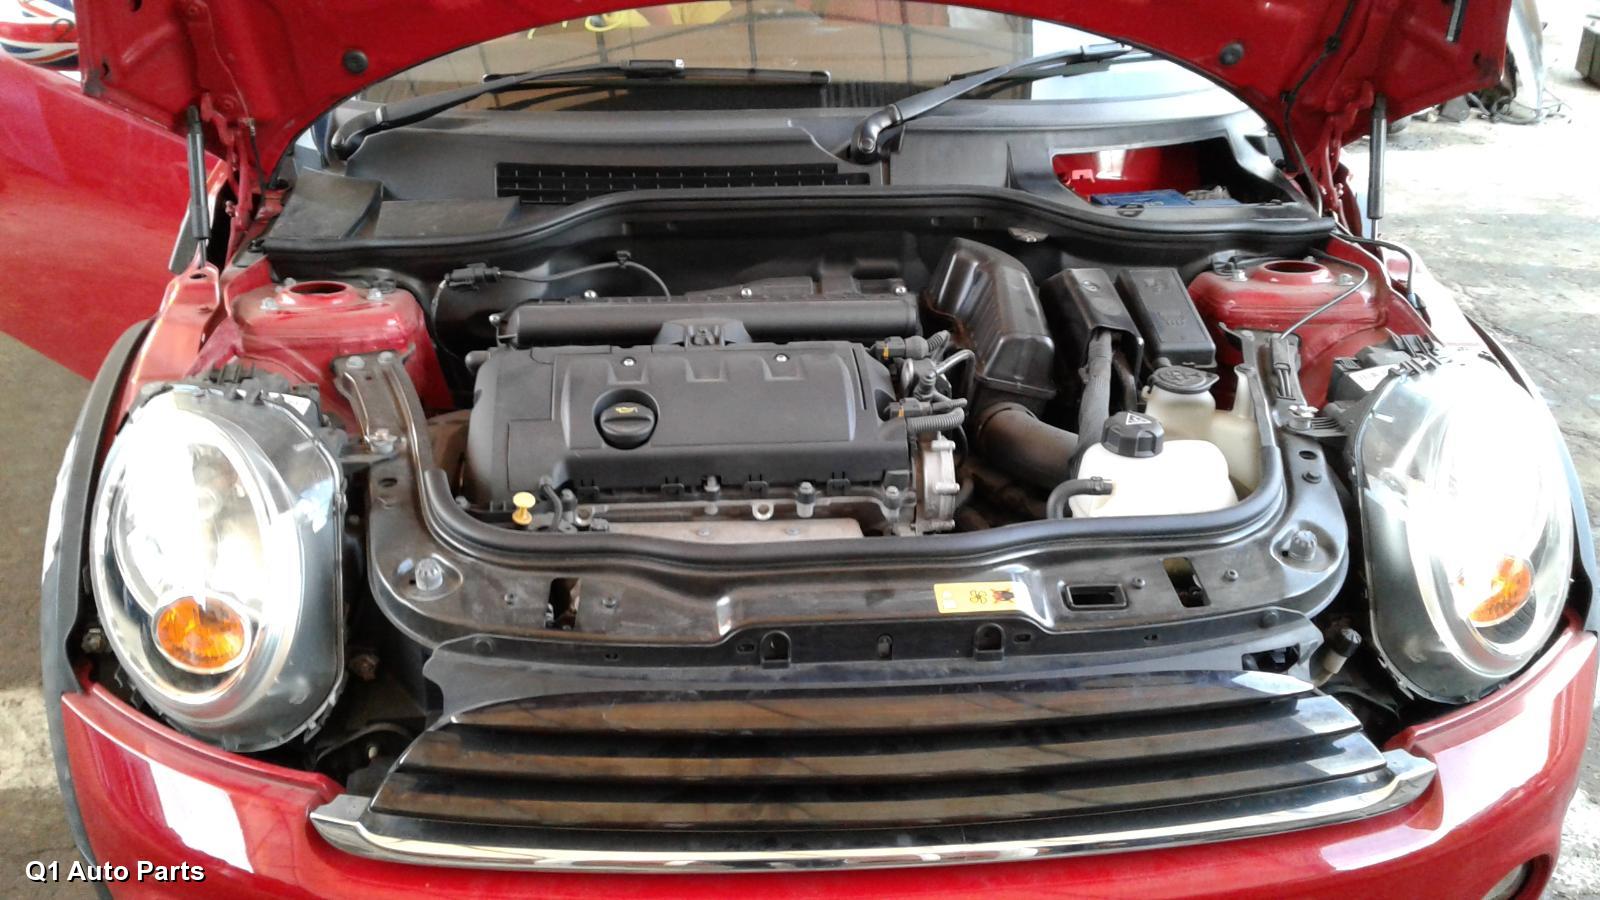 Second Hand Mini Cooper Engines For Sale Best Quality Wrranty